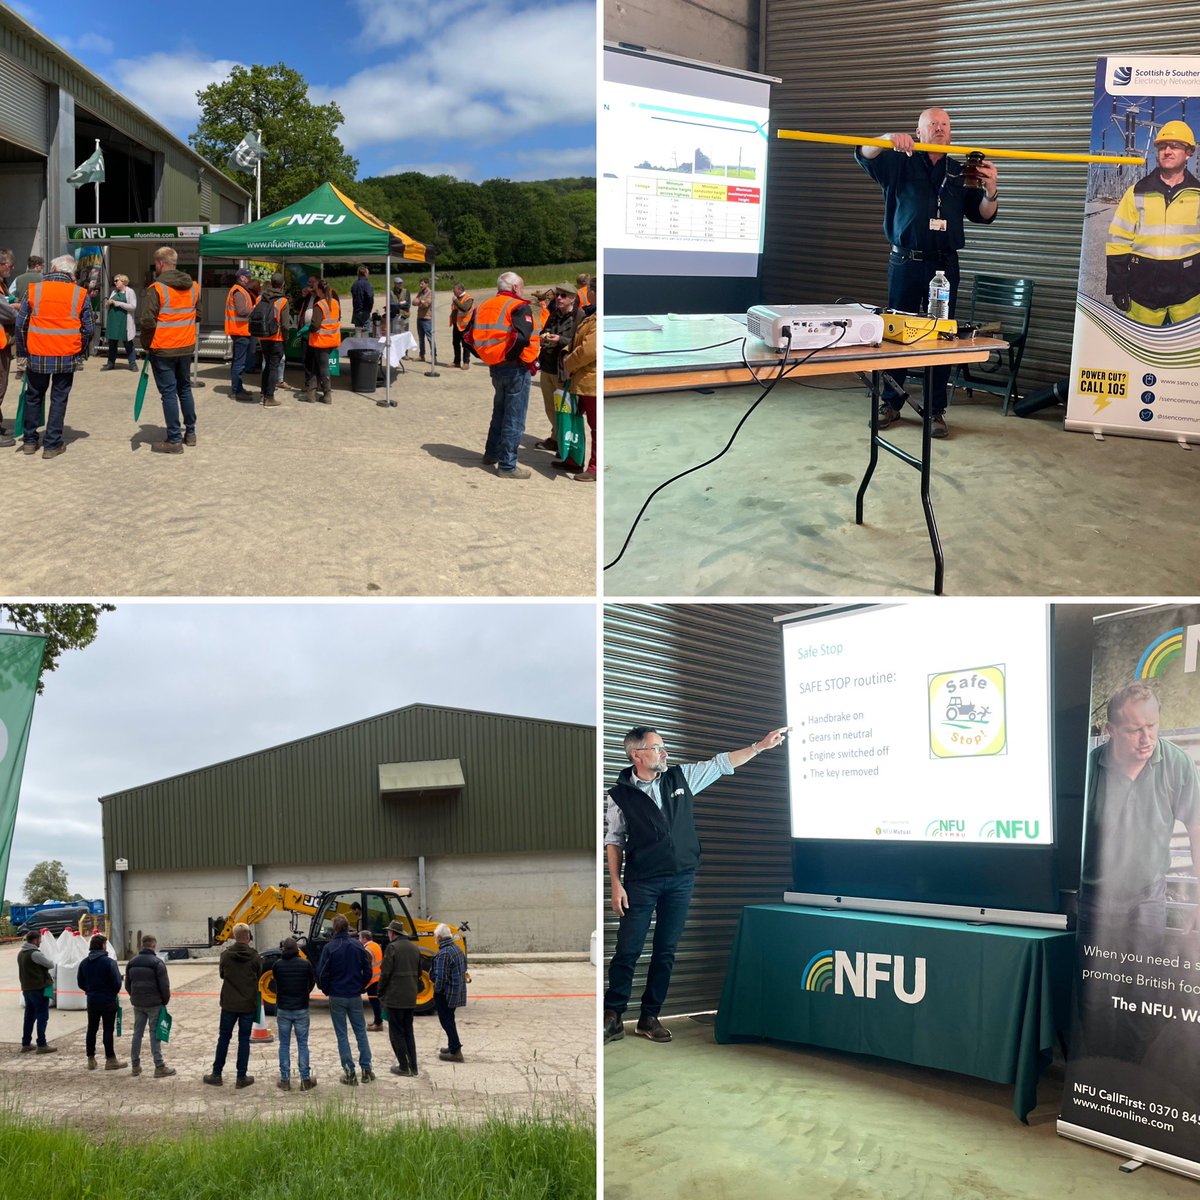 . @NFUtweets organising regional pre-harvest H&S workshops. Event in southeast was well organised & well attended with lots of info/advice, key points both new & refresher. Included what to do in emergency if machinery hits overhead powerline @ssencommunity #farmsafety #harvest